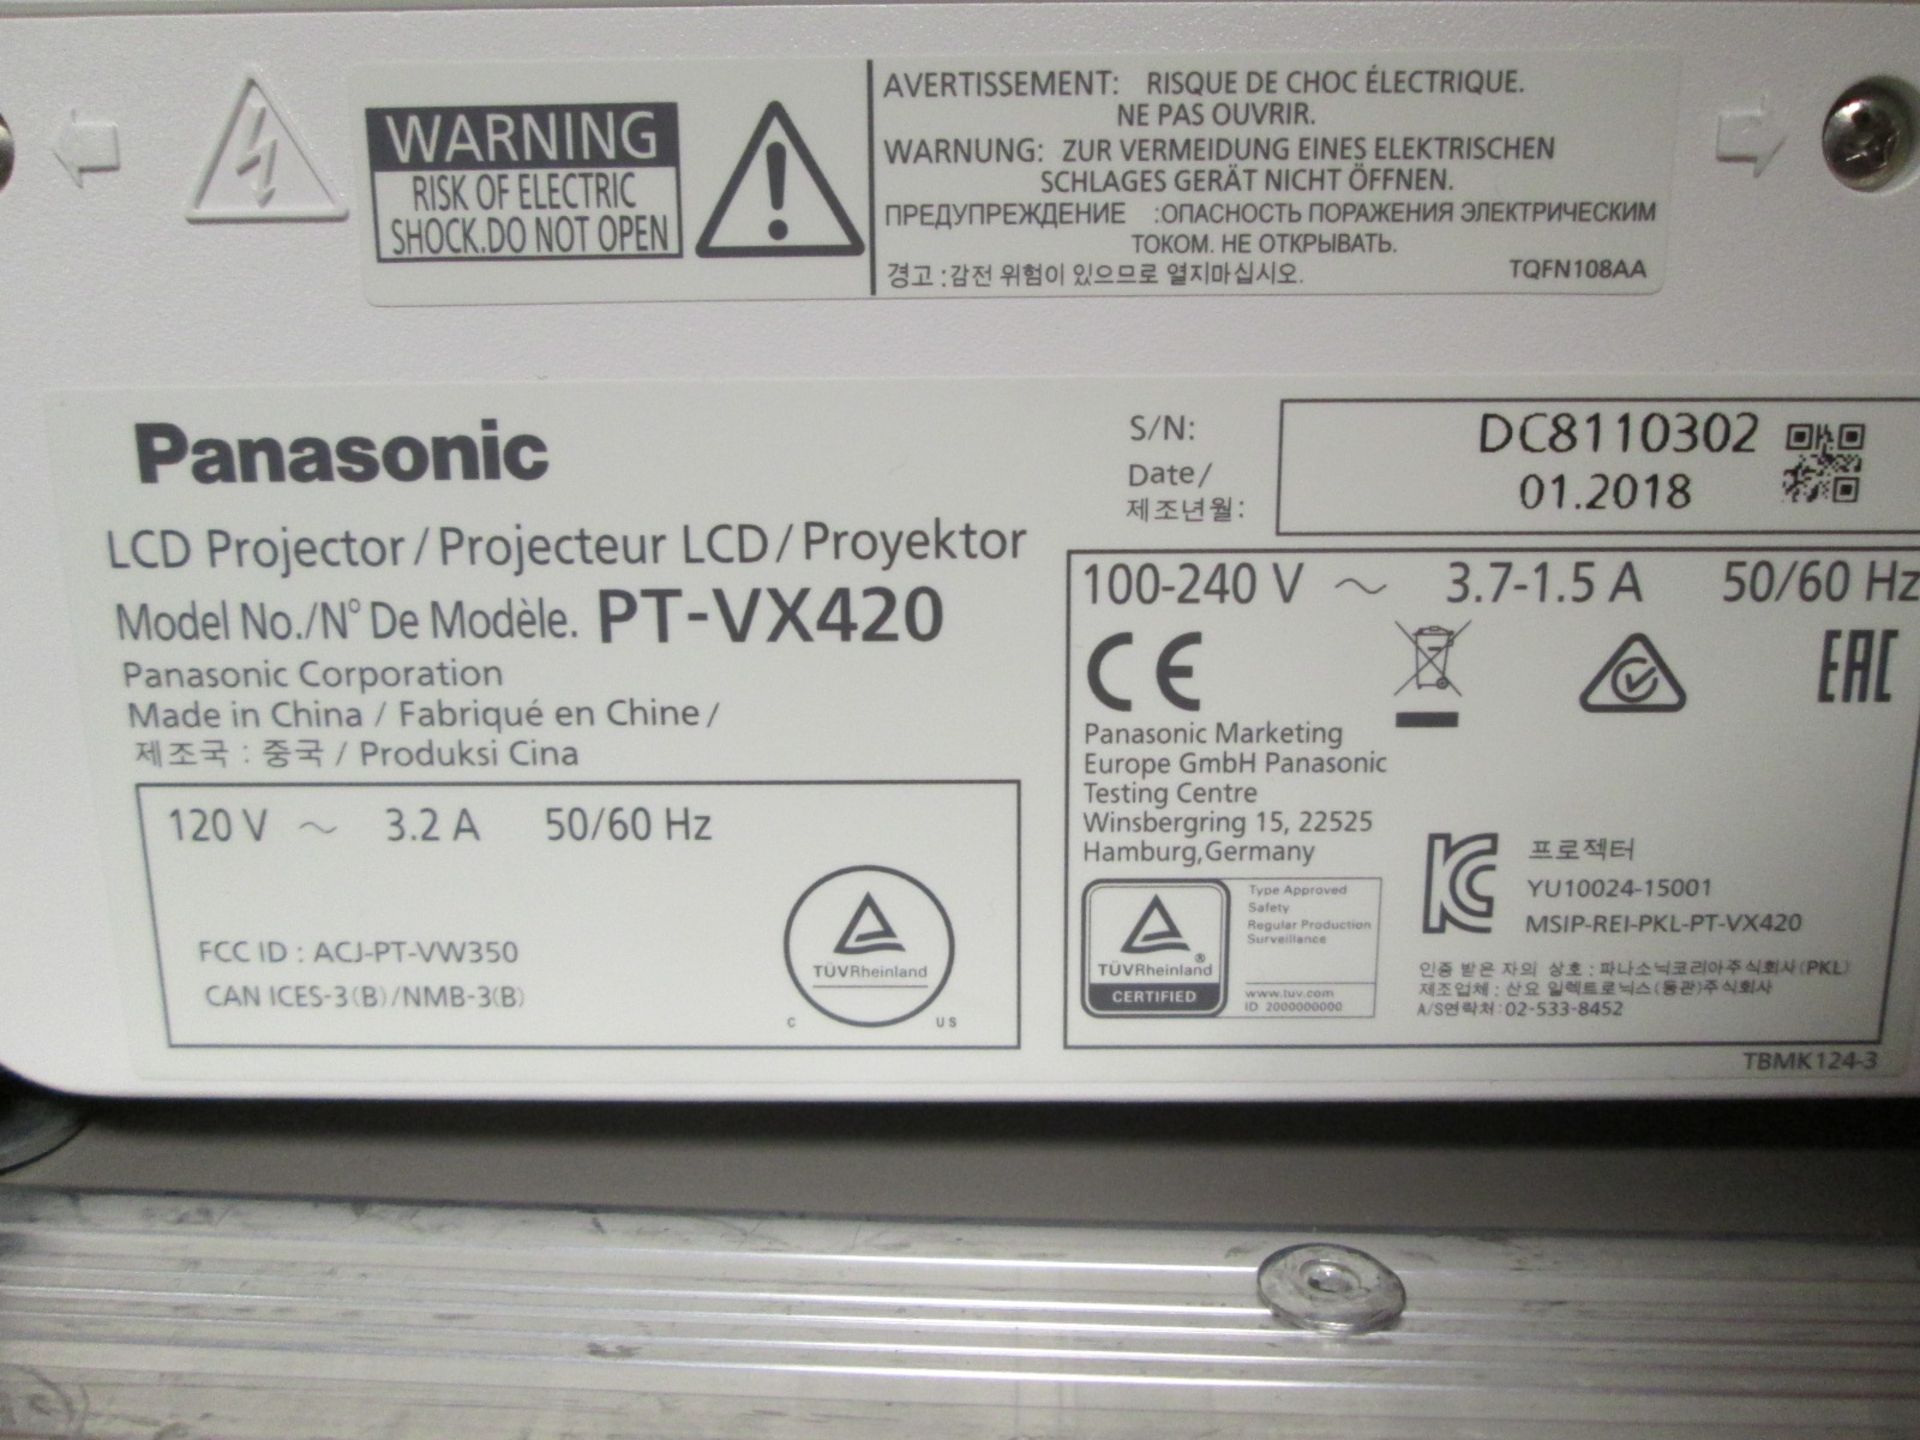 Panasonic PT-VX420 LCD Projector, S/N DC8110320, YOM 2018, In flight case - Image 4 of 6